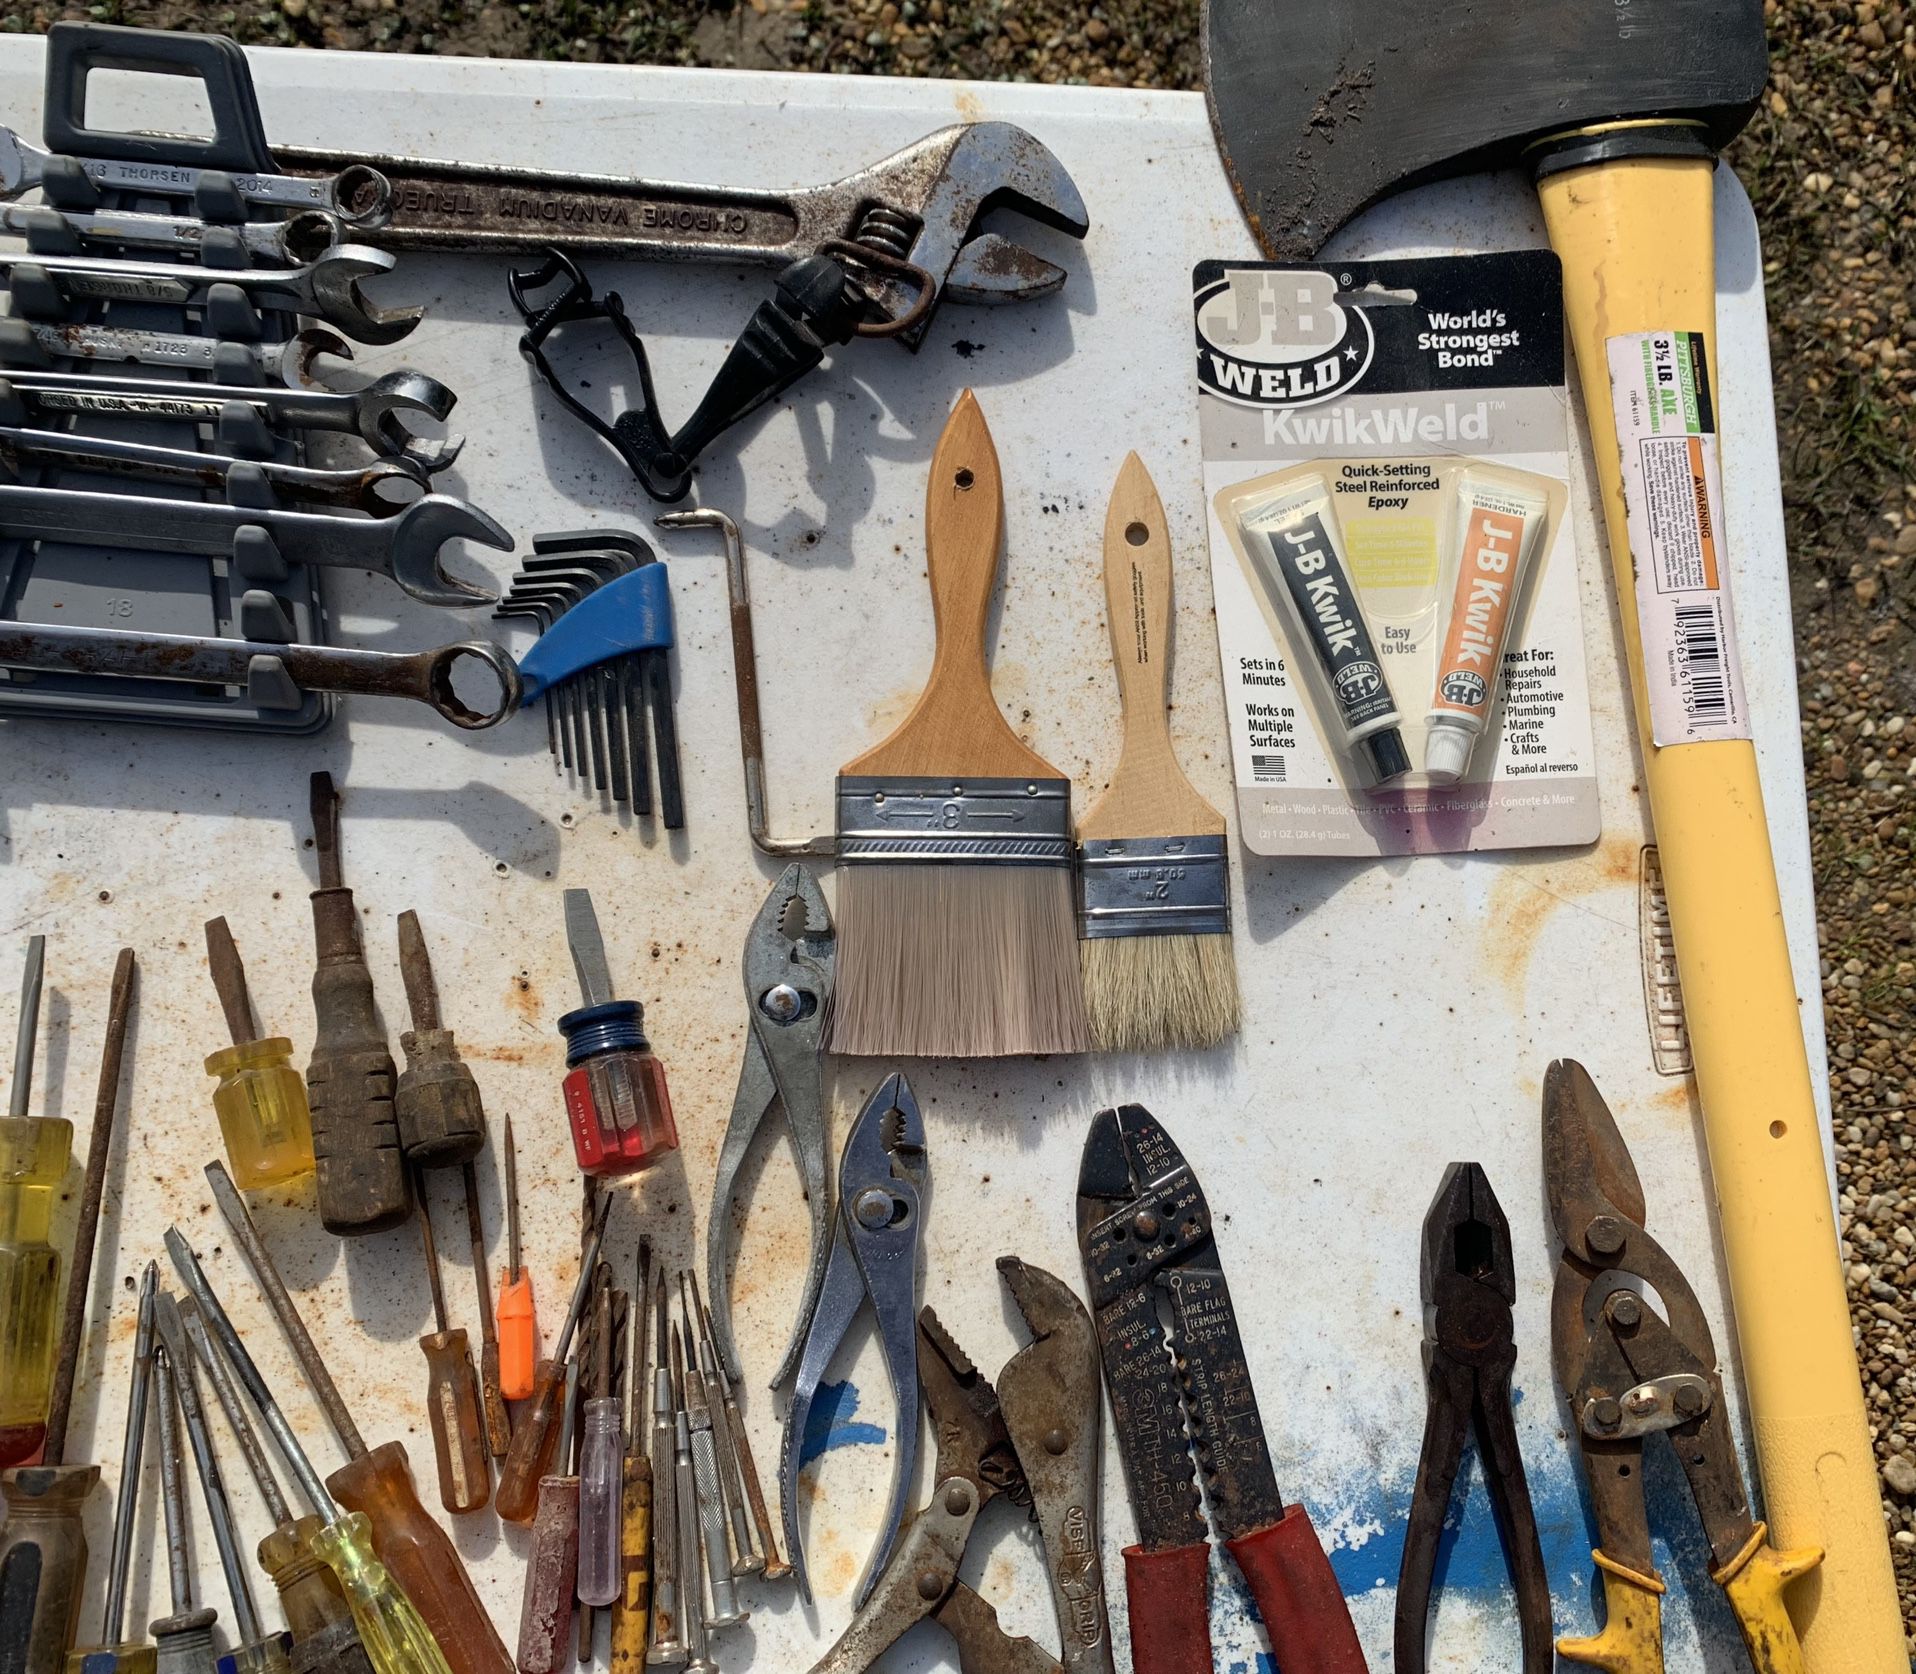 Lot Of Hand Tools 